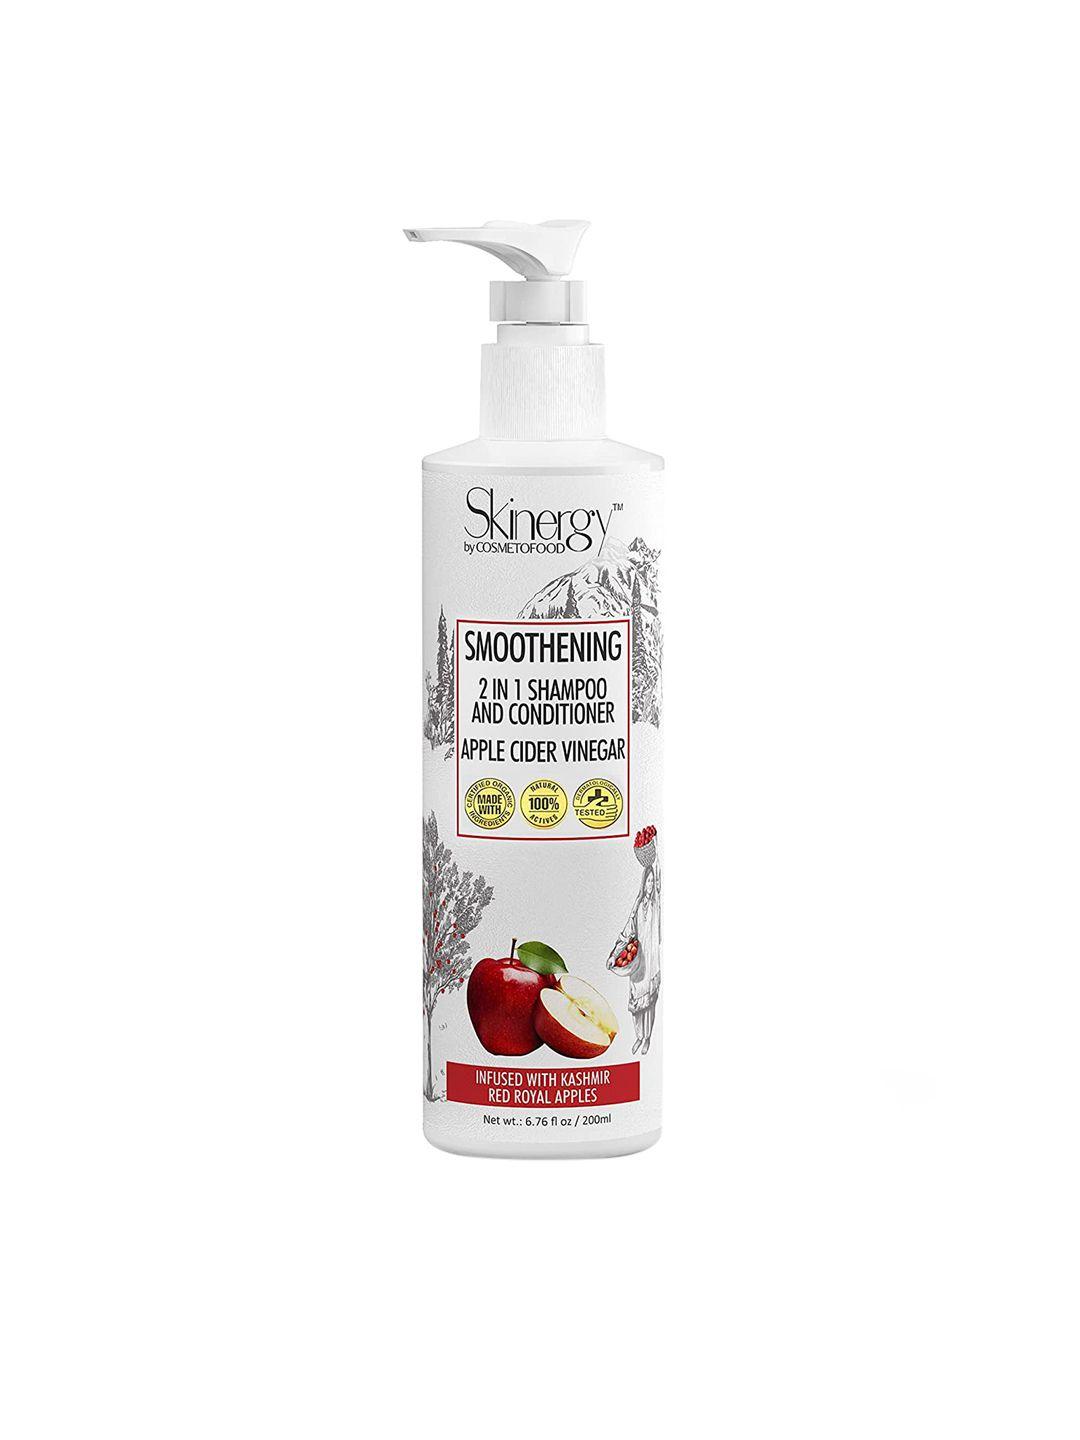 cosmetofood skinergy smoothening 2 in 1 shampoo & conditioner apple cider vinegar 200ml